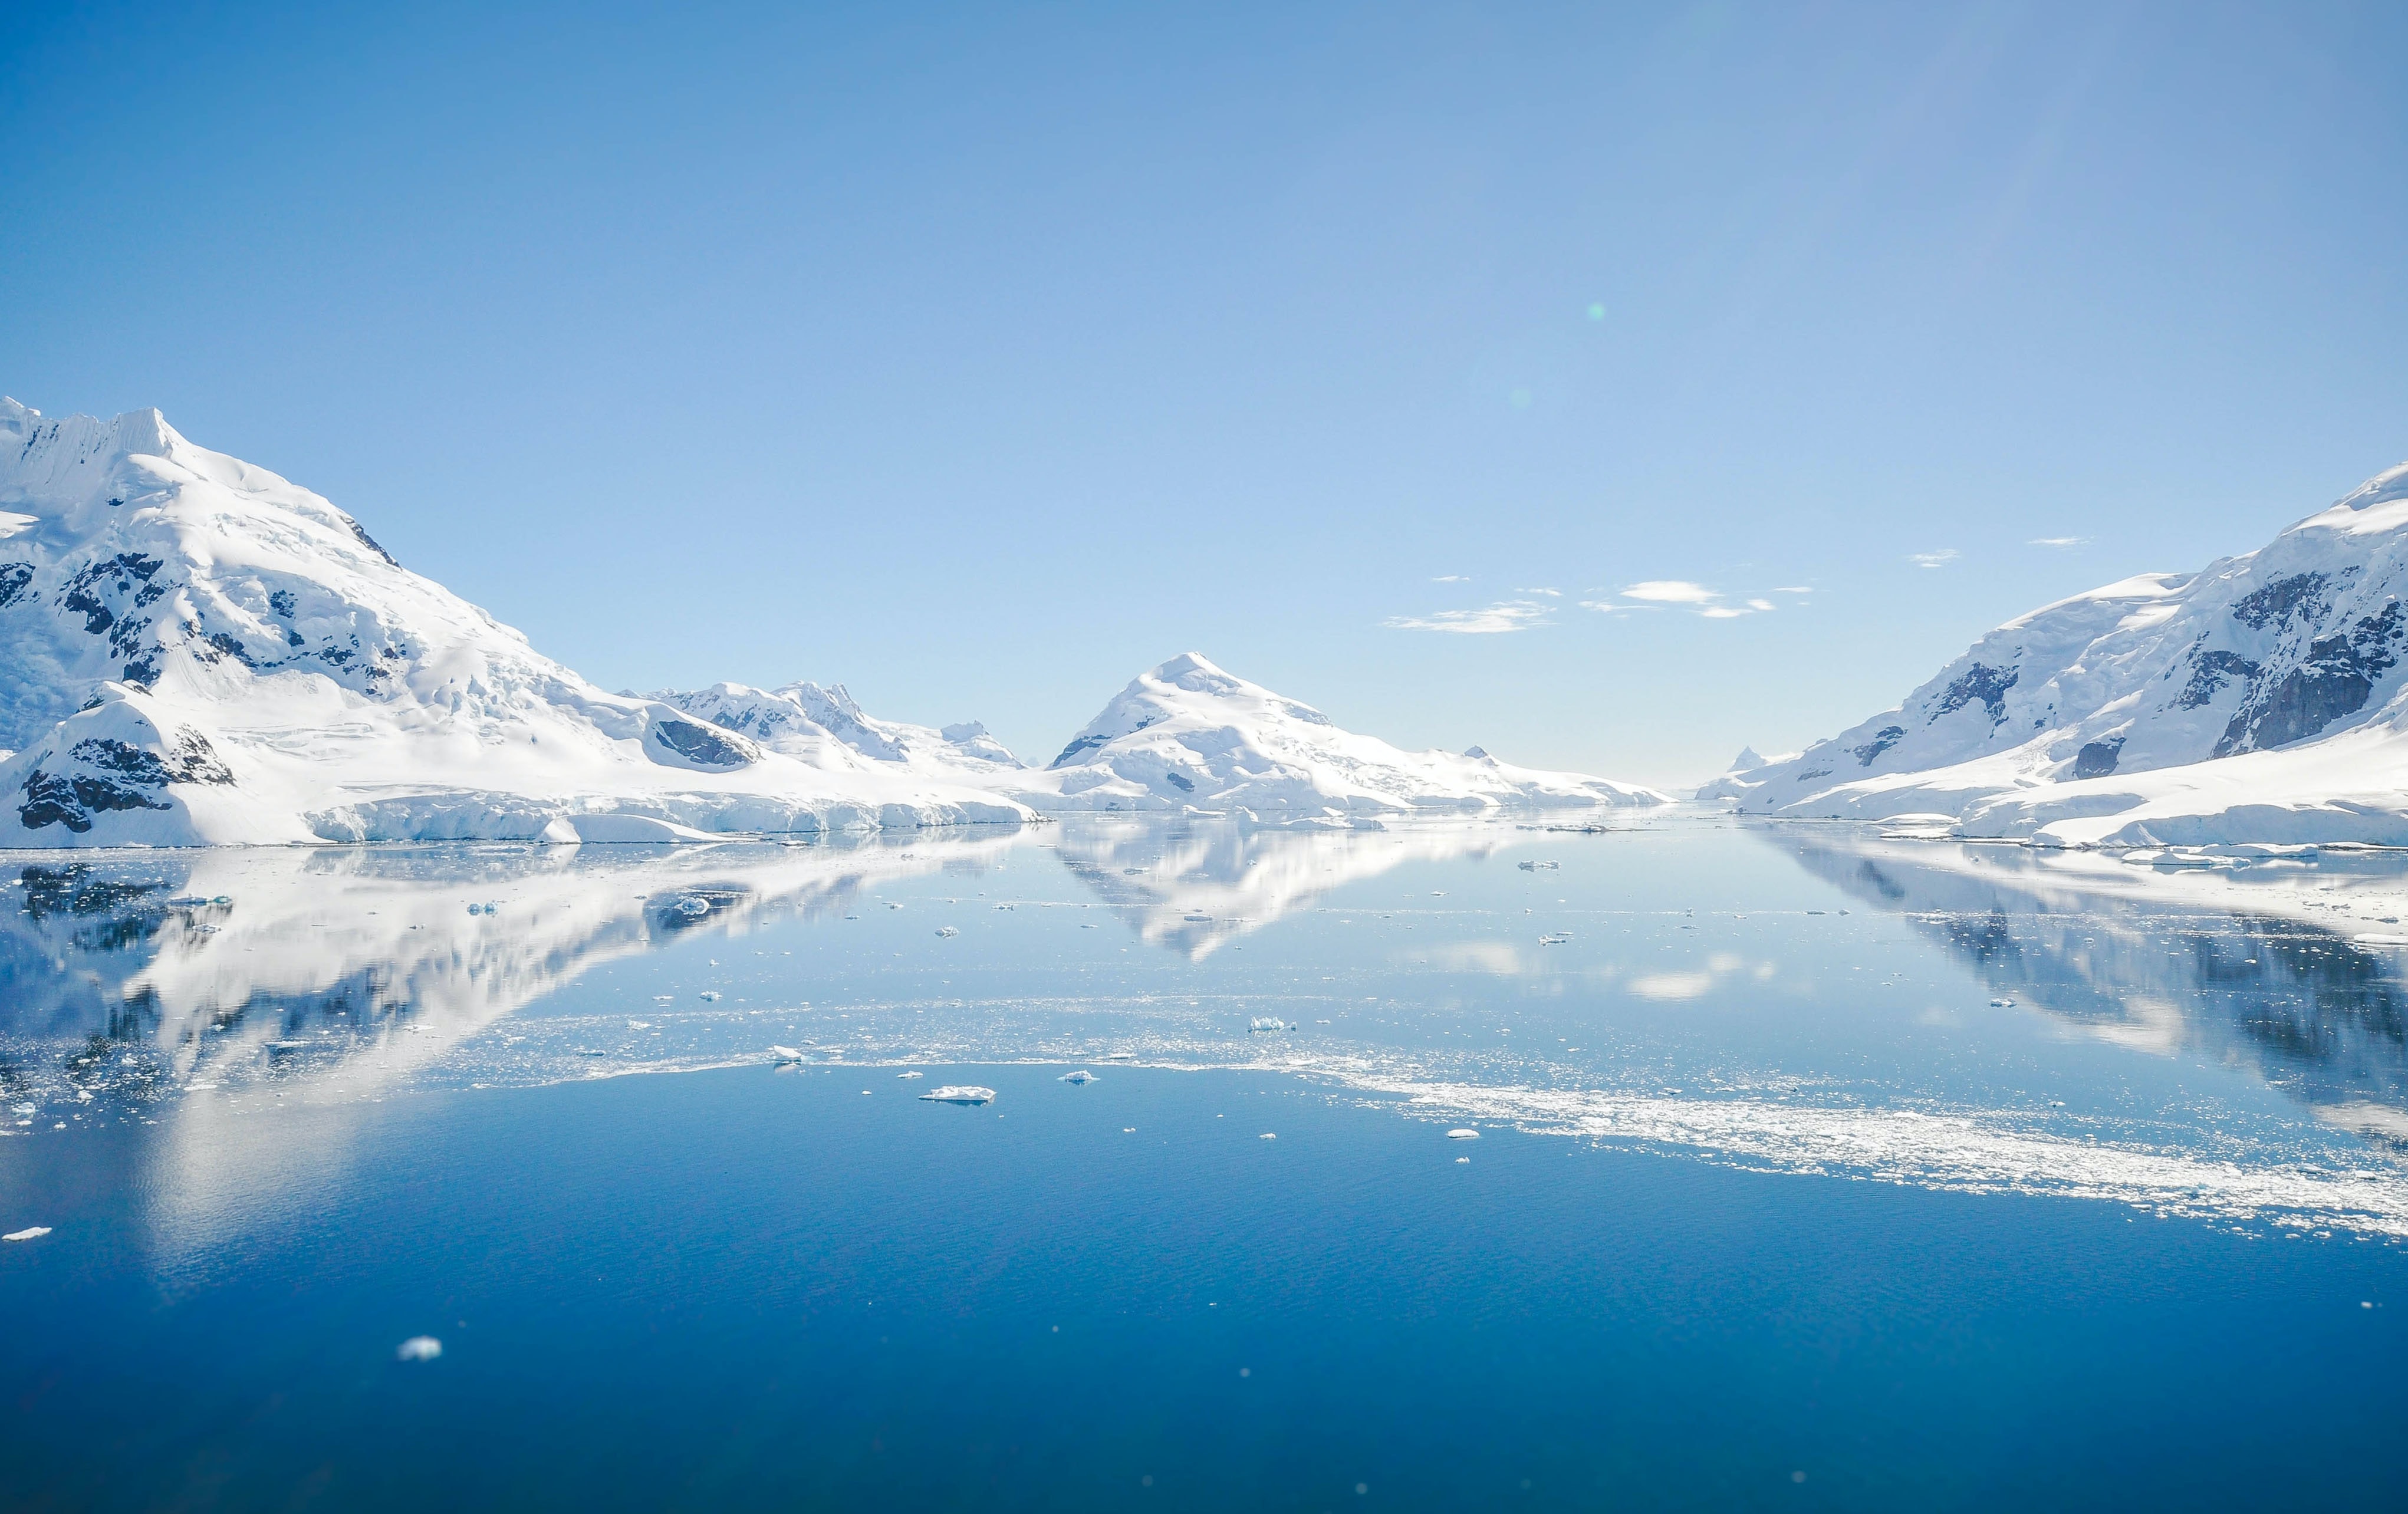 Melting ice: Limiting global warming to 1.5°C could reduce sea level rise by 50 percent